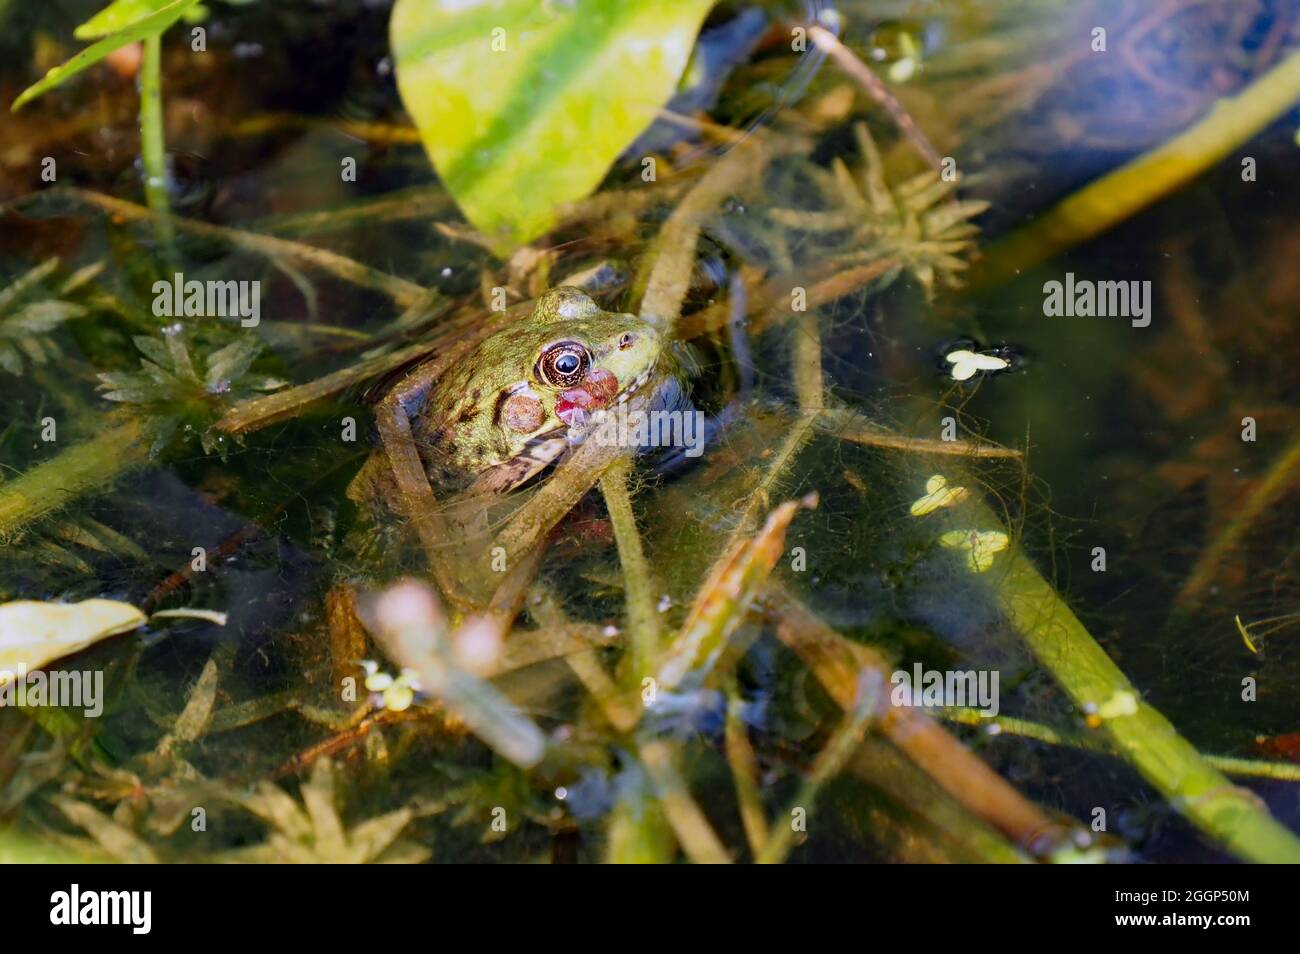 OLYMPUS DIGITAL CAMERA - Close-up of a northern leopard frog sitting half submerged in the water relaxing on the plants growing in a marsh. Stock Photo